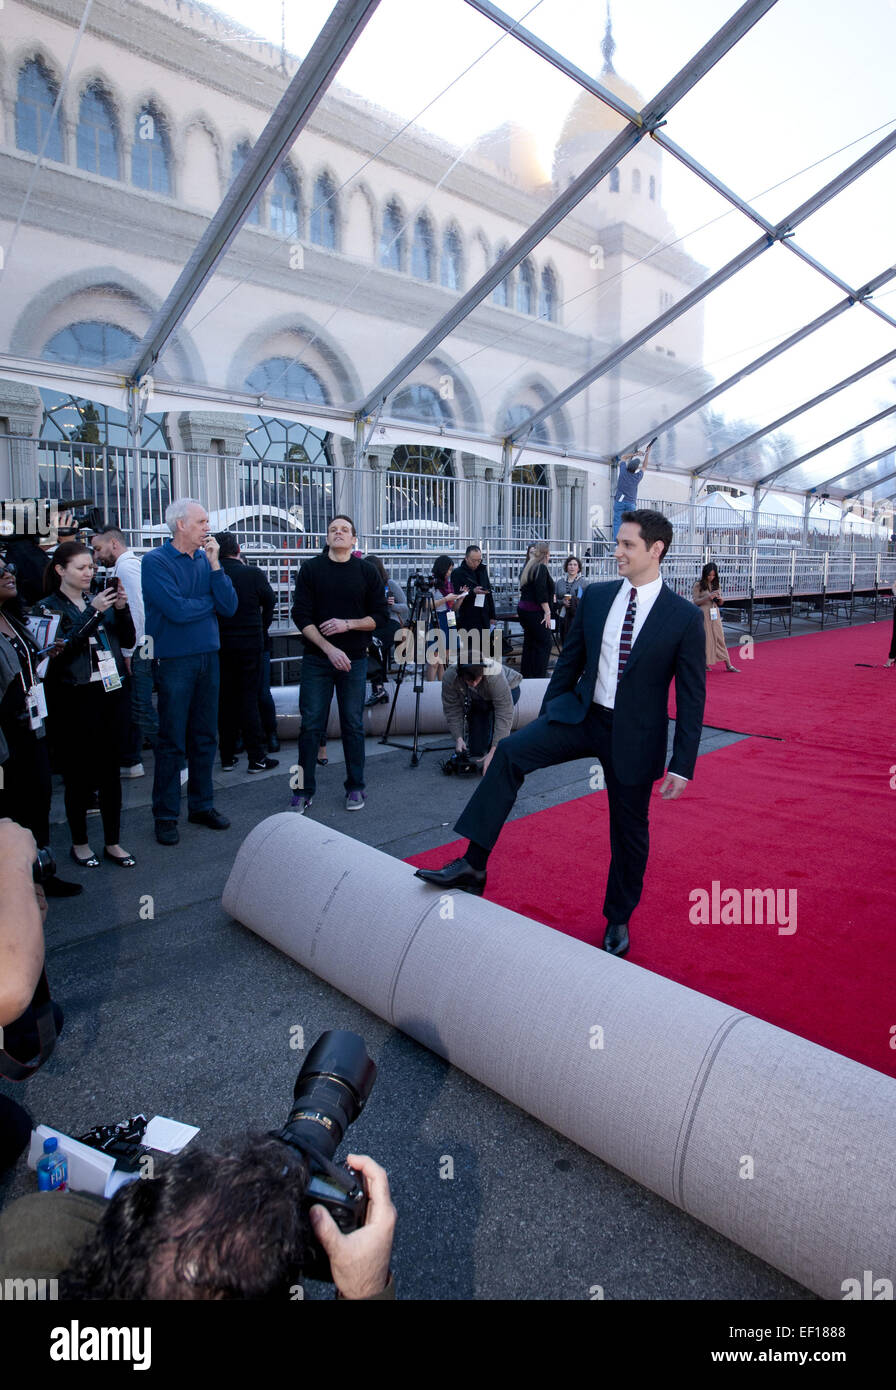 Los Angeles, California, USA. 24th Jan, 2015. American actor MATT MCGORRY poses for the news media after rolling out the red carpet on Saturday morning at the Shrine Auditorium as workers set up tents, stages, bleachers and displays on Saturday. © David Bro/ZUMA Wire/Alamy Live News Stock Photo